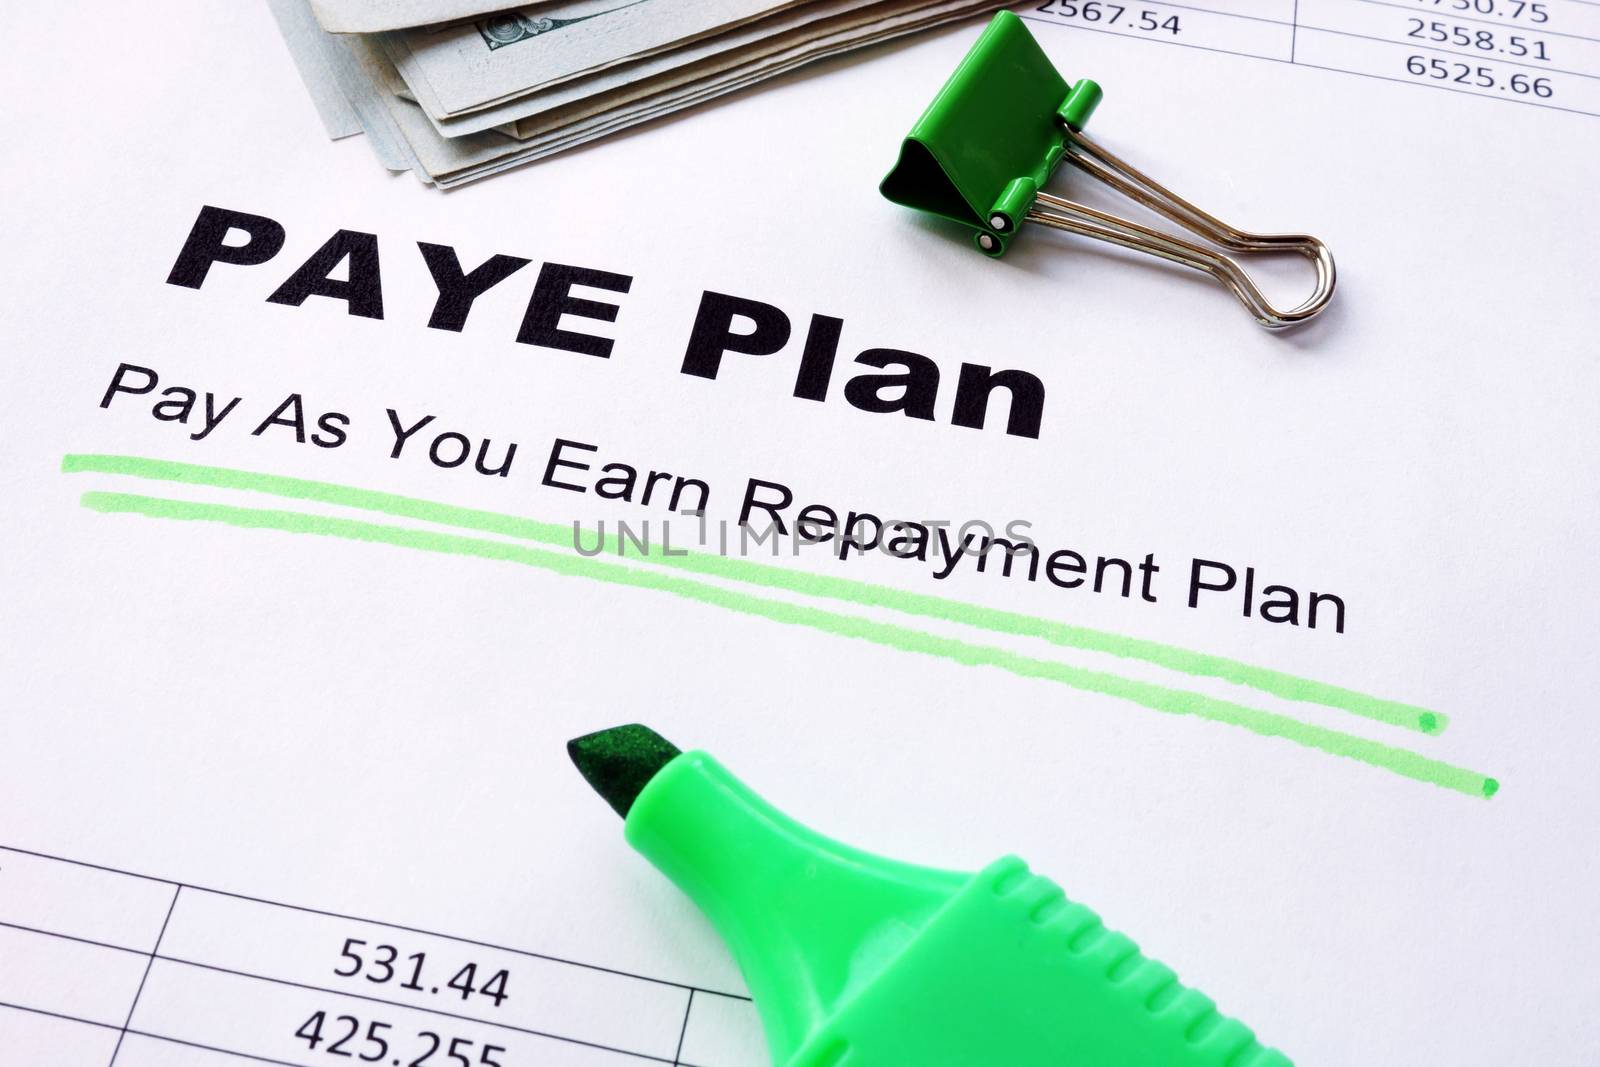 Pay As You Earn Repayment PAYE Plan underlined sign.